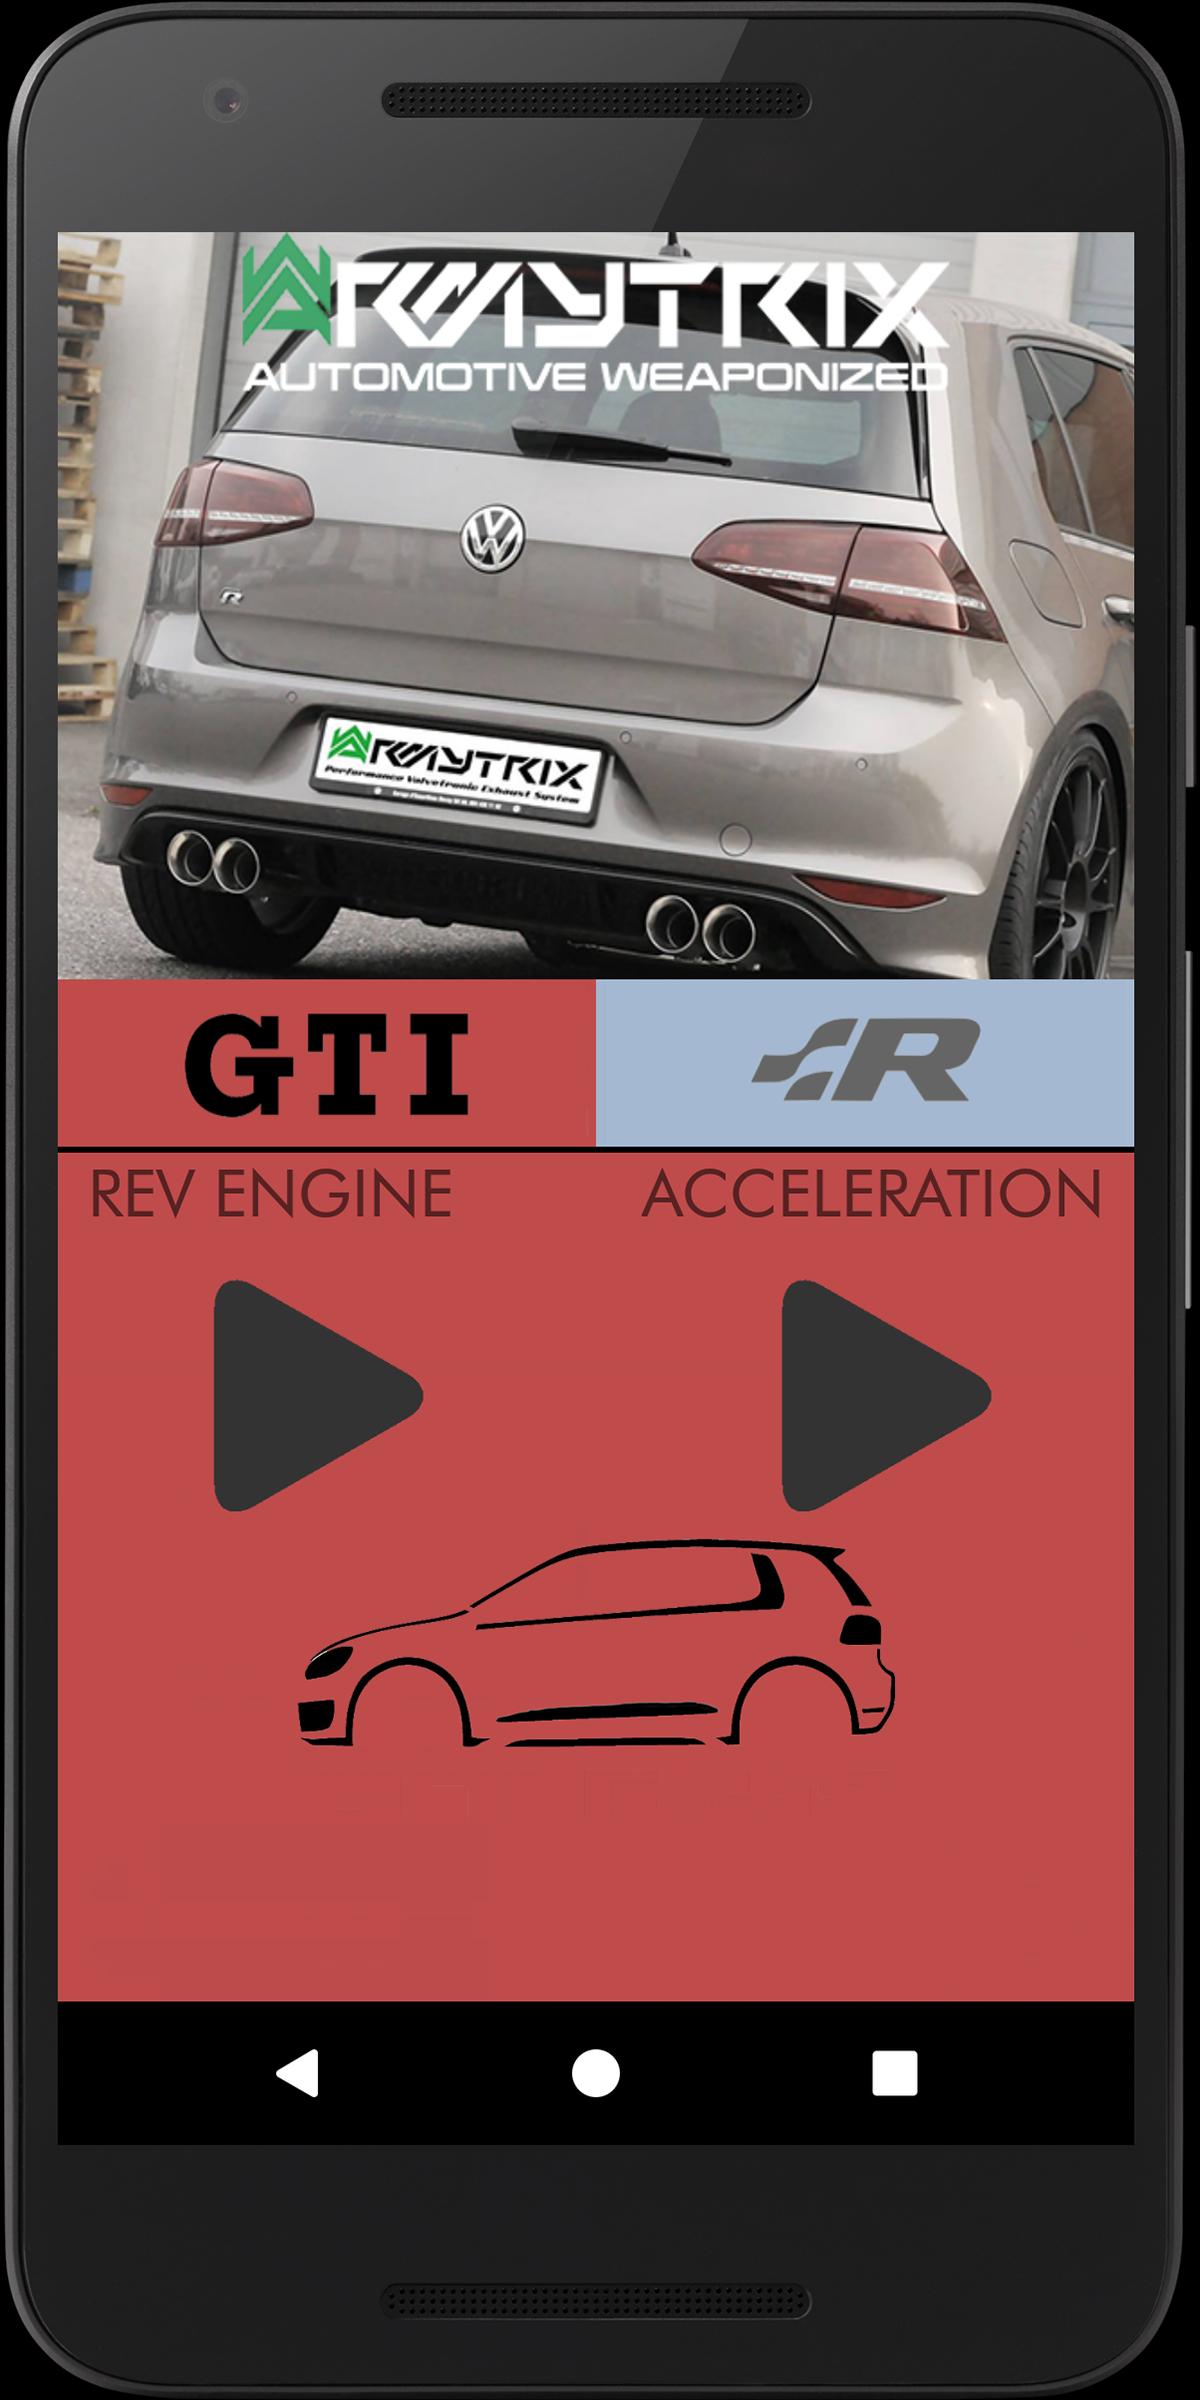 GOLF GTI R Exhaust Soundboard for Android - APK Download